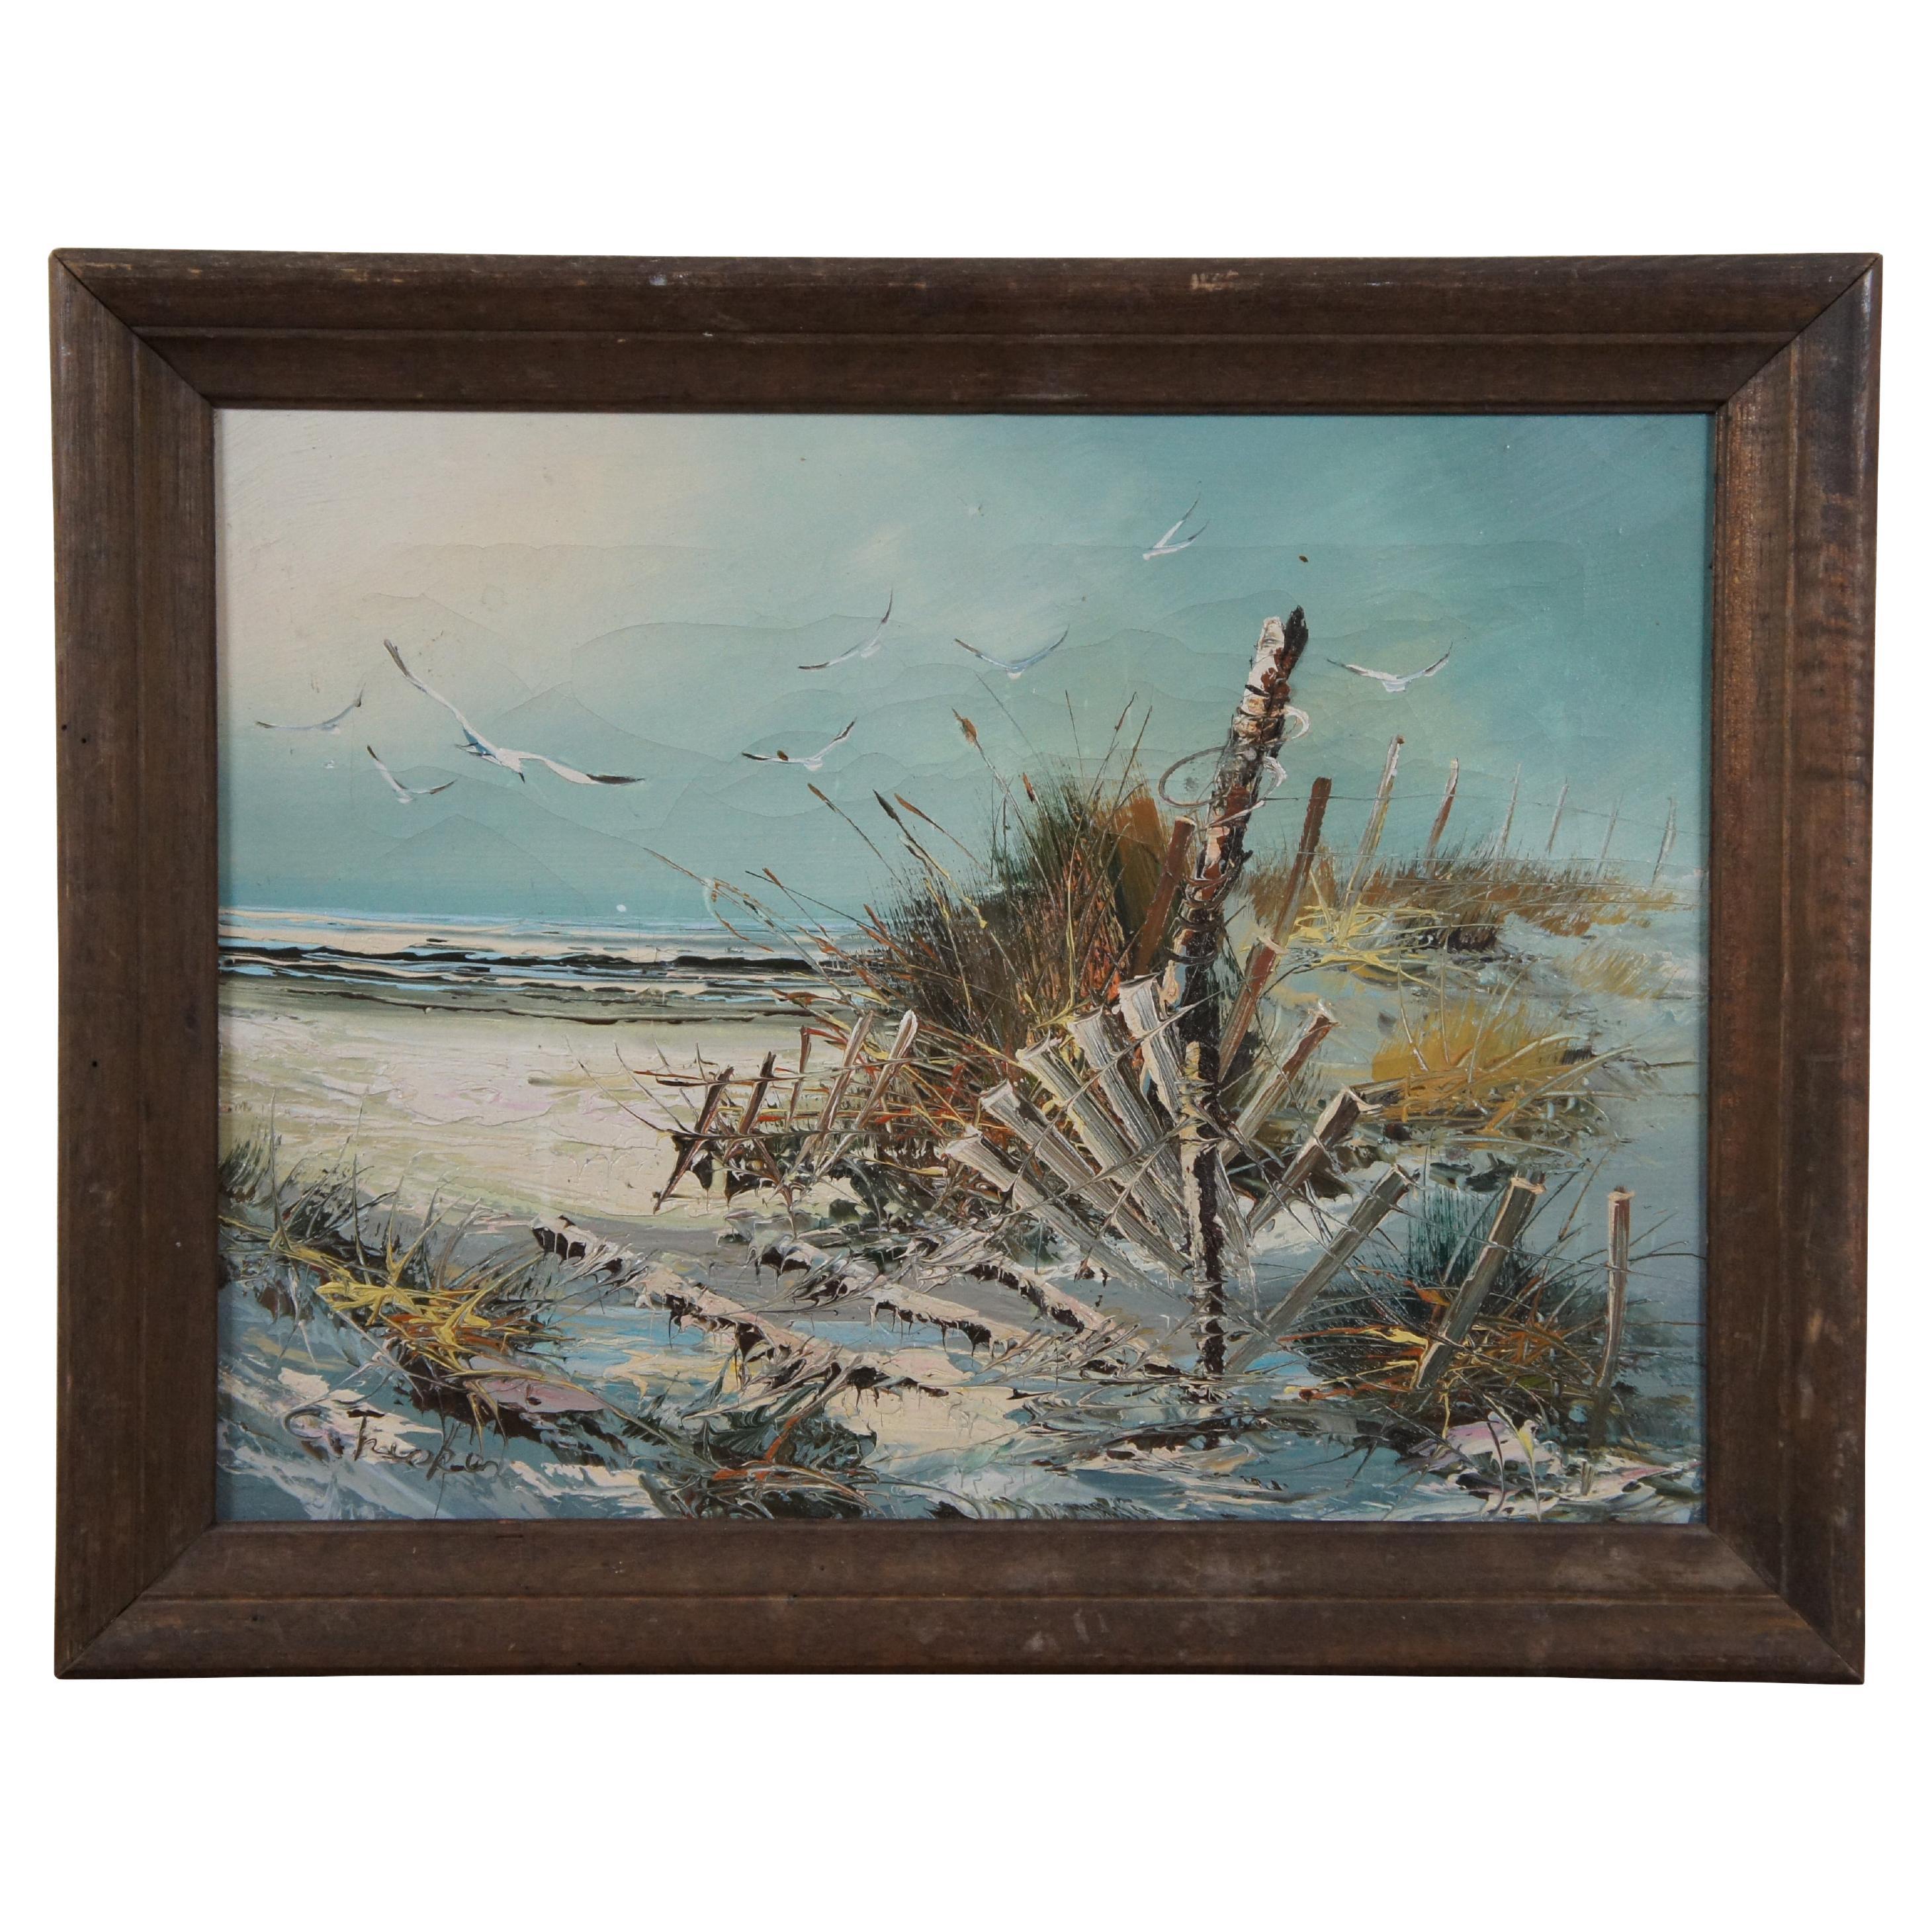 20th Century Expressionist Oil on Canvas Coastal Landscape Painting Seagulls 18"